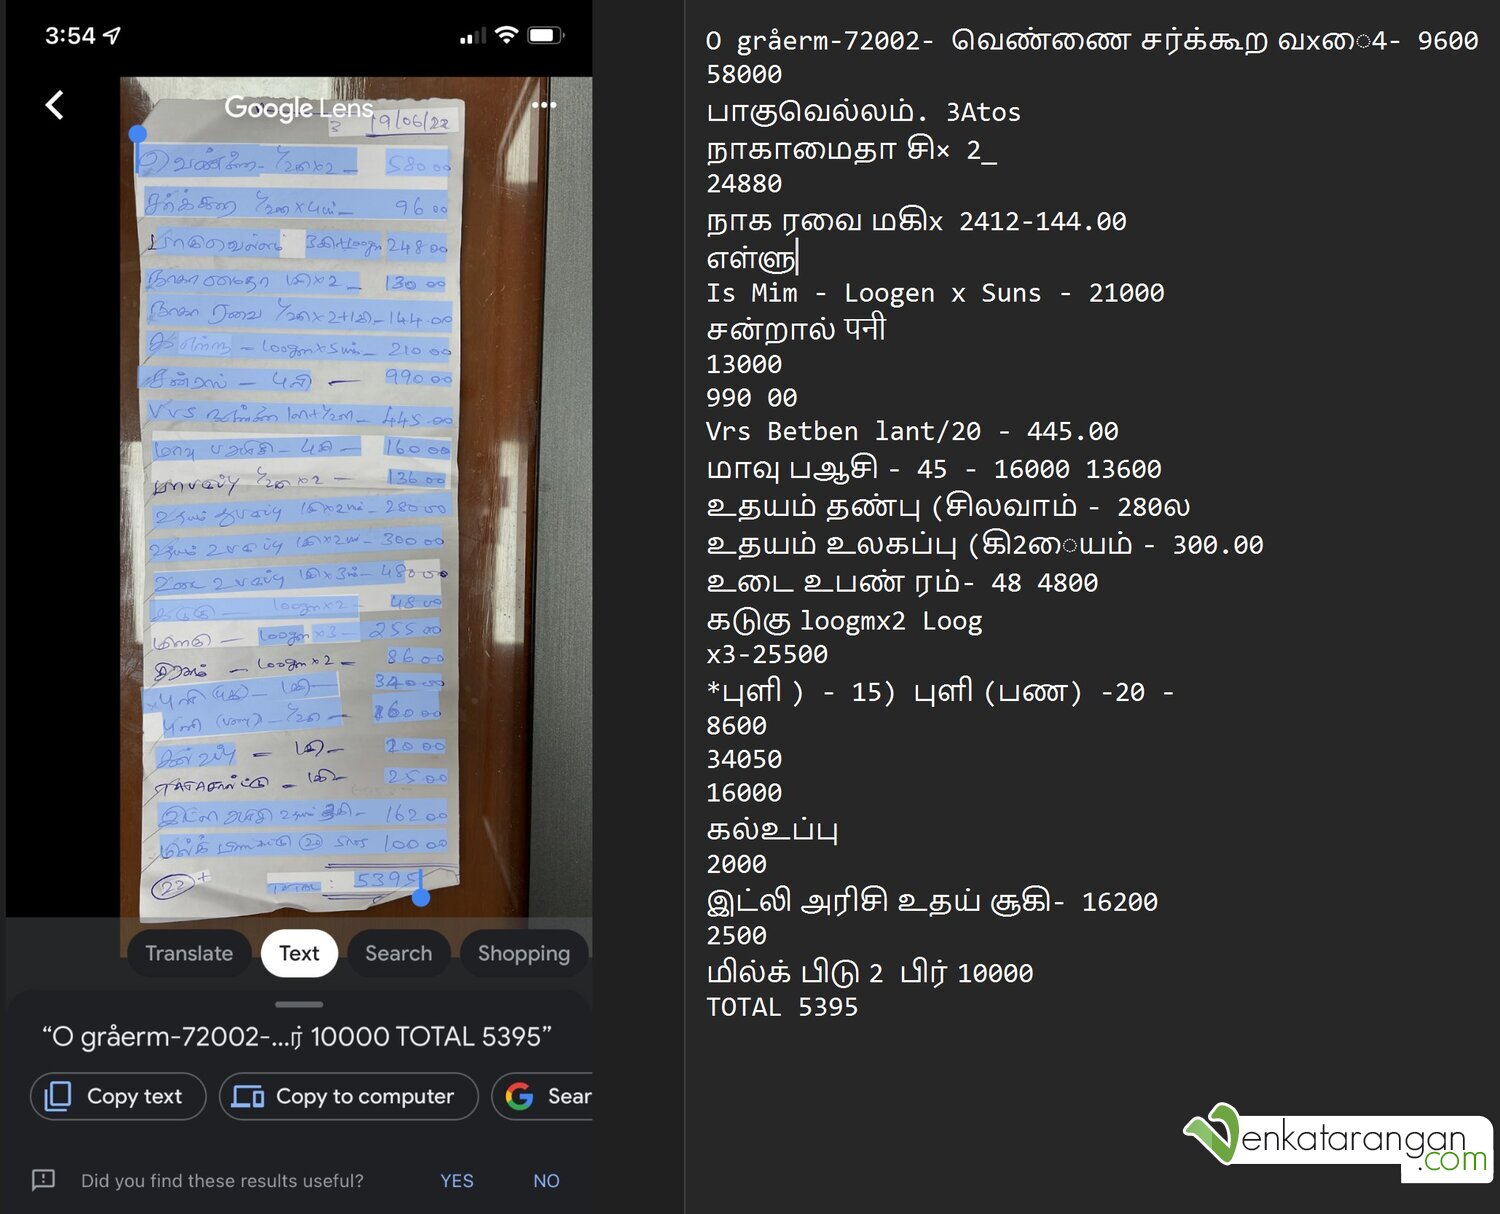 On the left is the receipt in tamil opened in Google Lens, on the right is the recognized text 